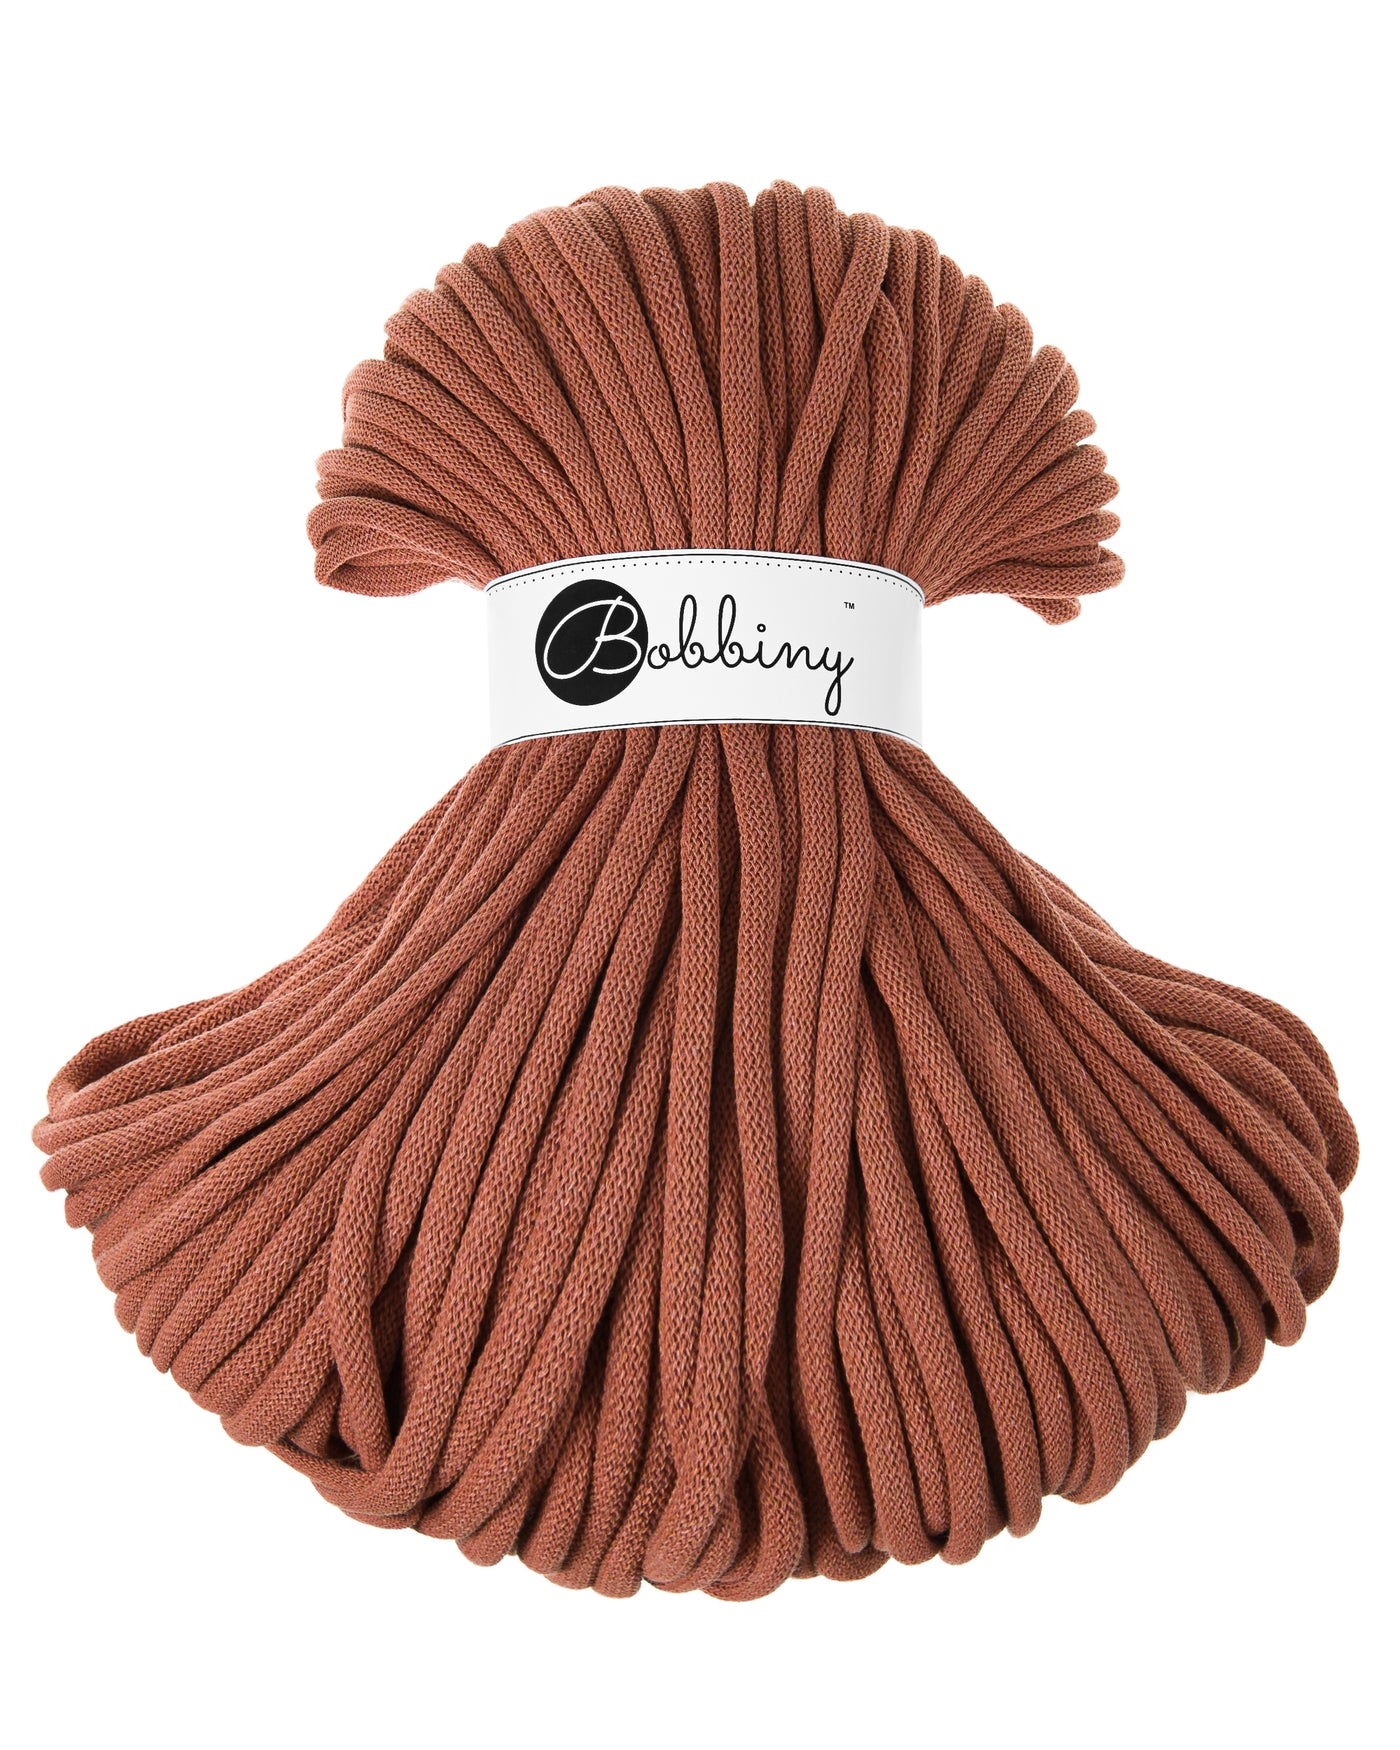 These gorgeous Bobbiny cords are made in Poland from 100% recycled cottons and are non toxic and certified safe for children.  9mm Diameter  Length 100m  Recommended for use with 14-16mm crochet hooks or knitting needles.  Perfect for use with Macrame, Crochet or Knitting.